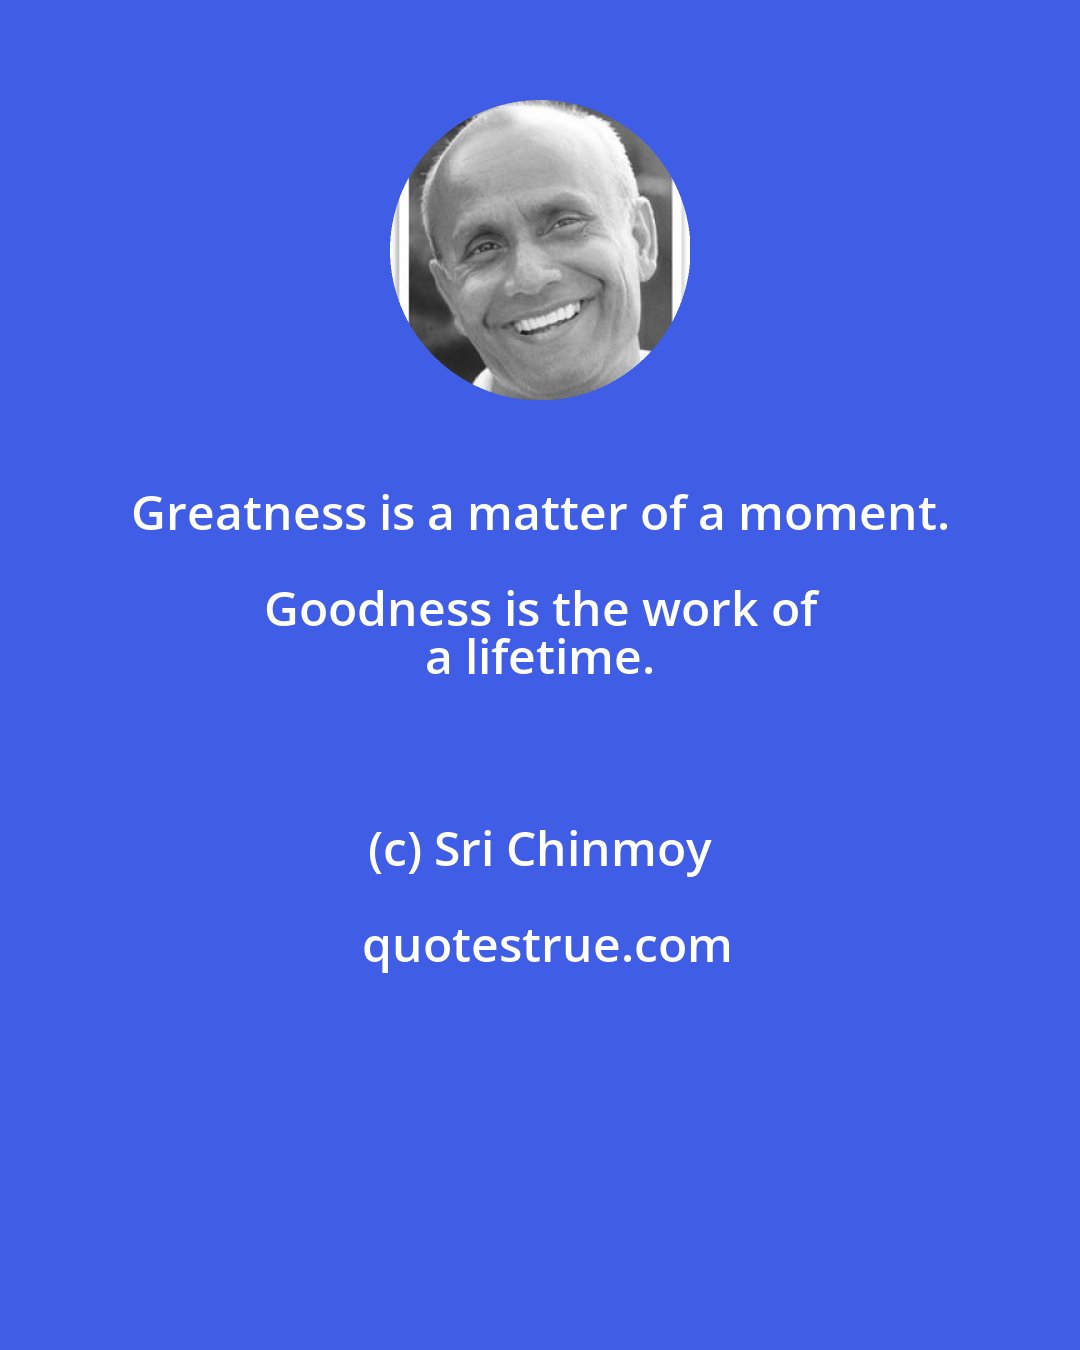 Sri Chinmoy: Greatness is a matter of a moment. Goodness is the work of 
 a lifetime.